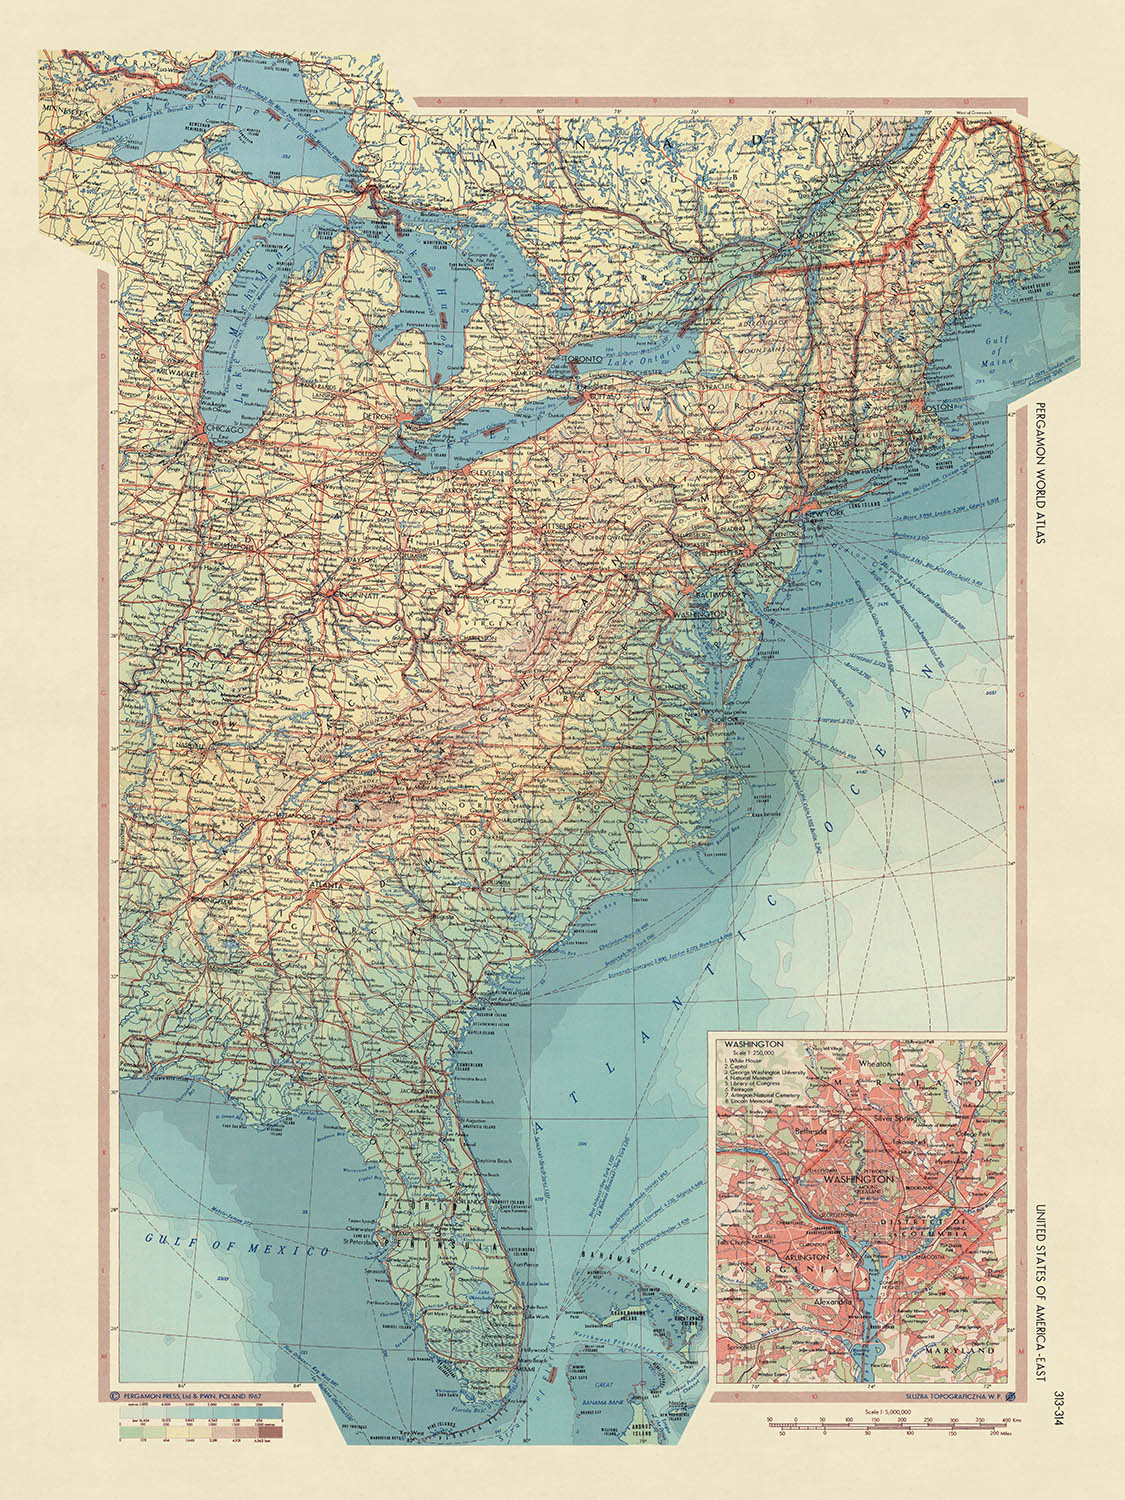 Old Map of Eastern United States, 1967: New York, Chicago, Washington D.C., Great Lakes, Mississippi River